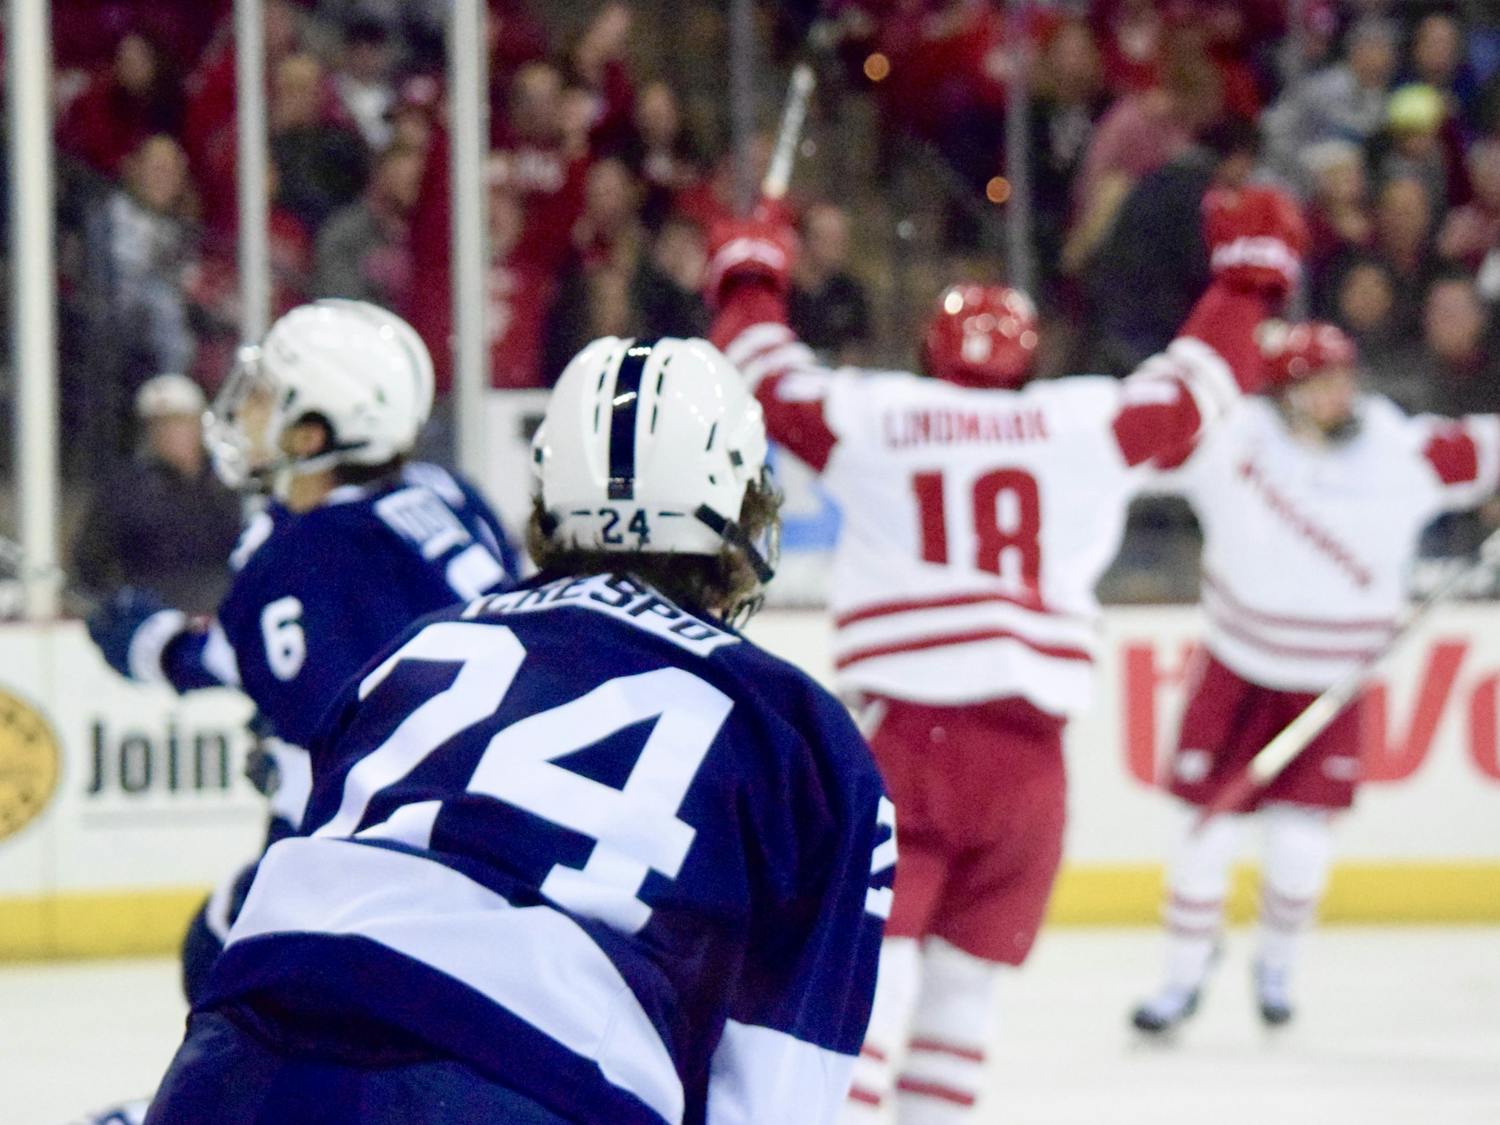 PHOTOS: Nittany Lions are no match for No. 6 Badgers after 6-3 Wisconsin Win